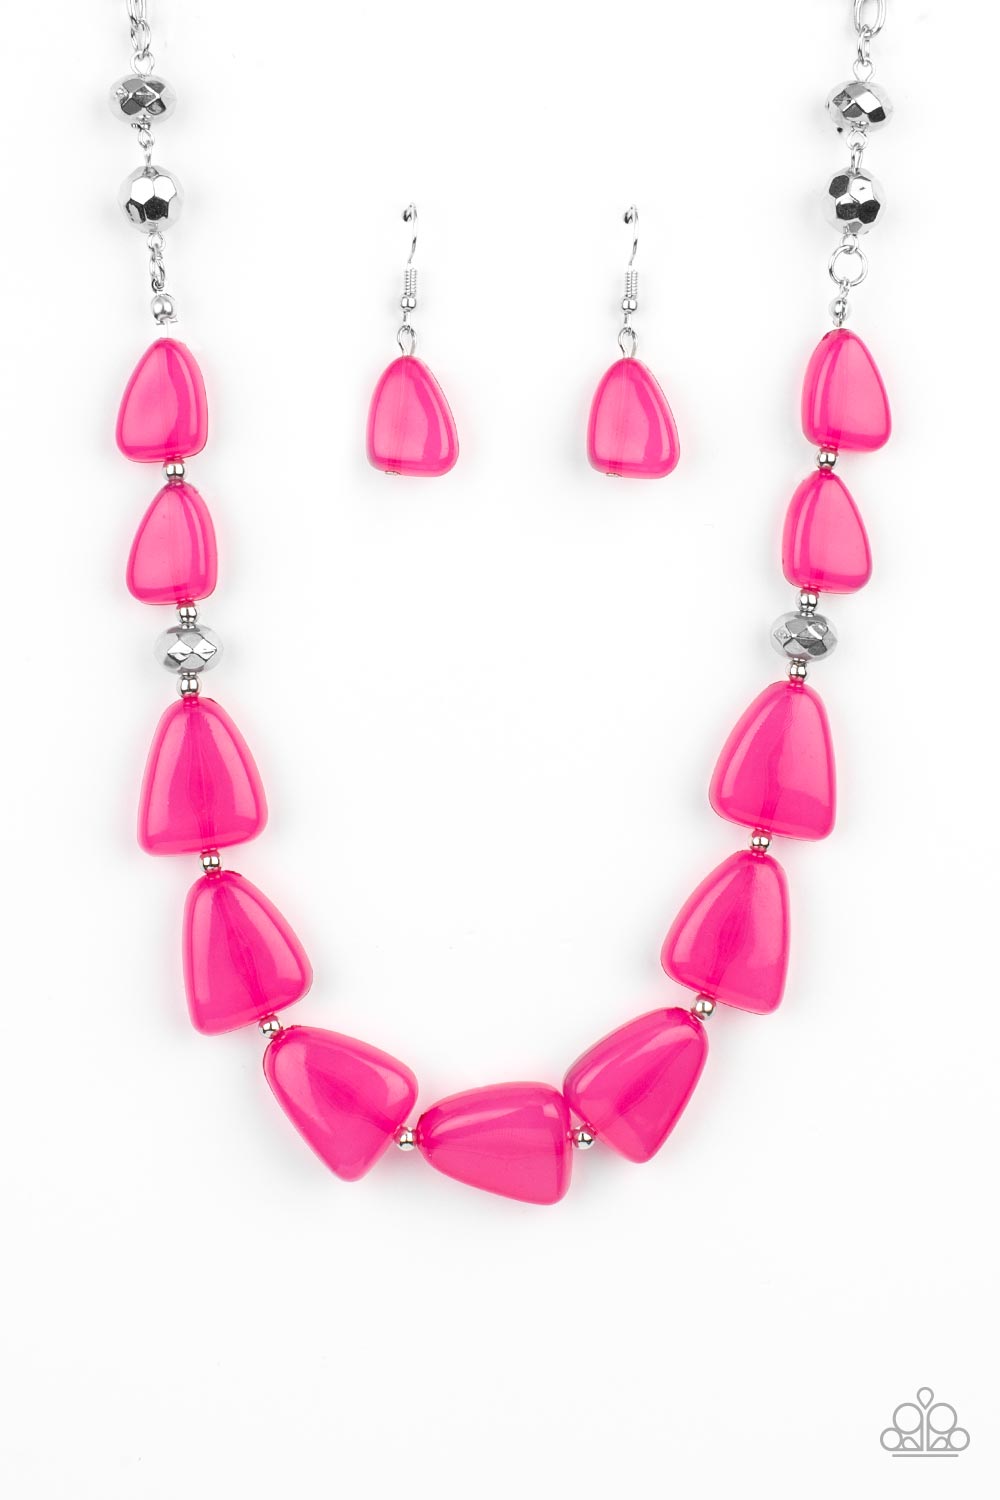 Tenaciously Tangy Pink Necklace - Paparazzi Accessories  Infused with dainty silver and faceted silver beads, imperfect triangular opaque Fuchsia Fedora beads are threaded along an invisible wire below the collar for a vivacious pop of color. Features an adjustable clasp closure.  Sold as one individual necklace. Includes one pair of matching earrings.